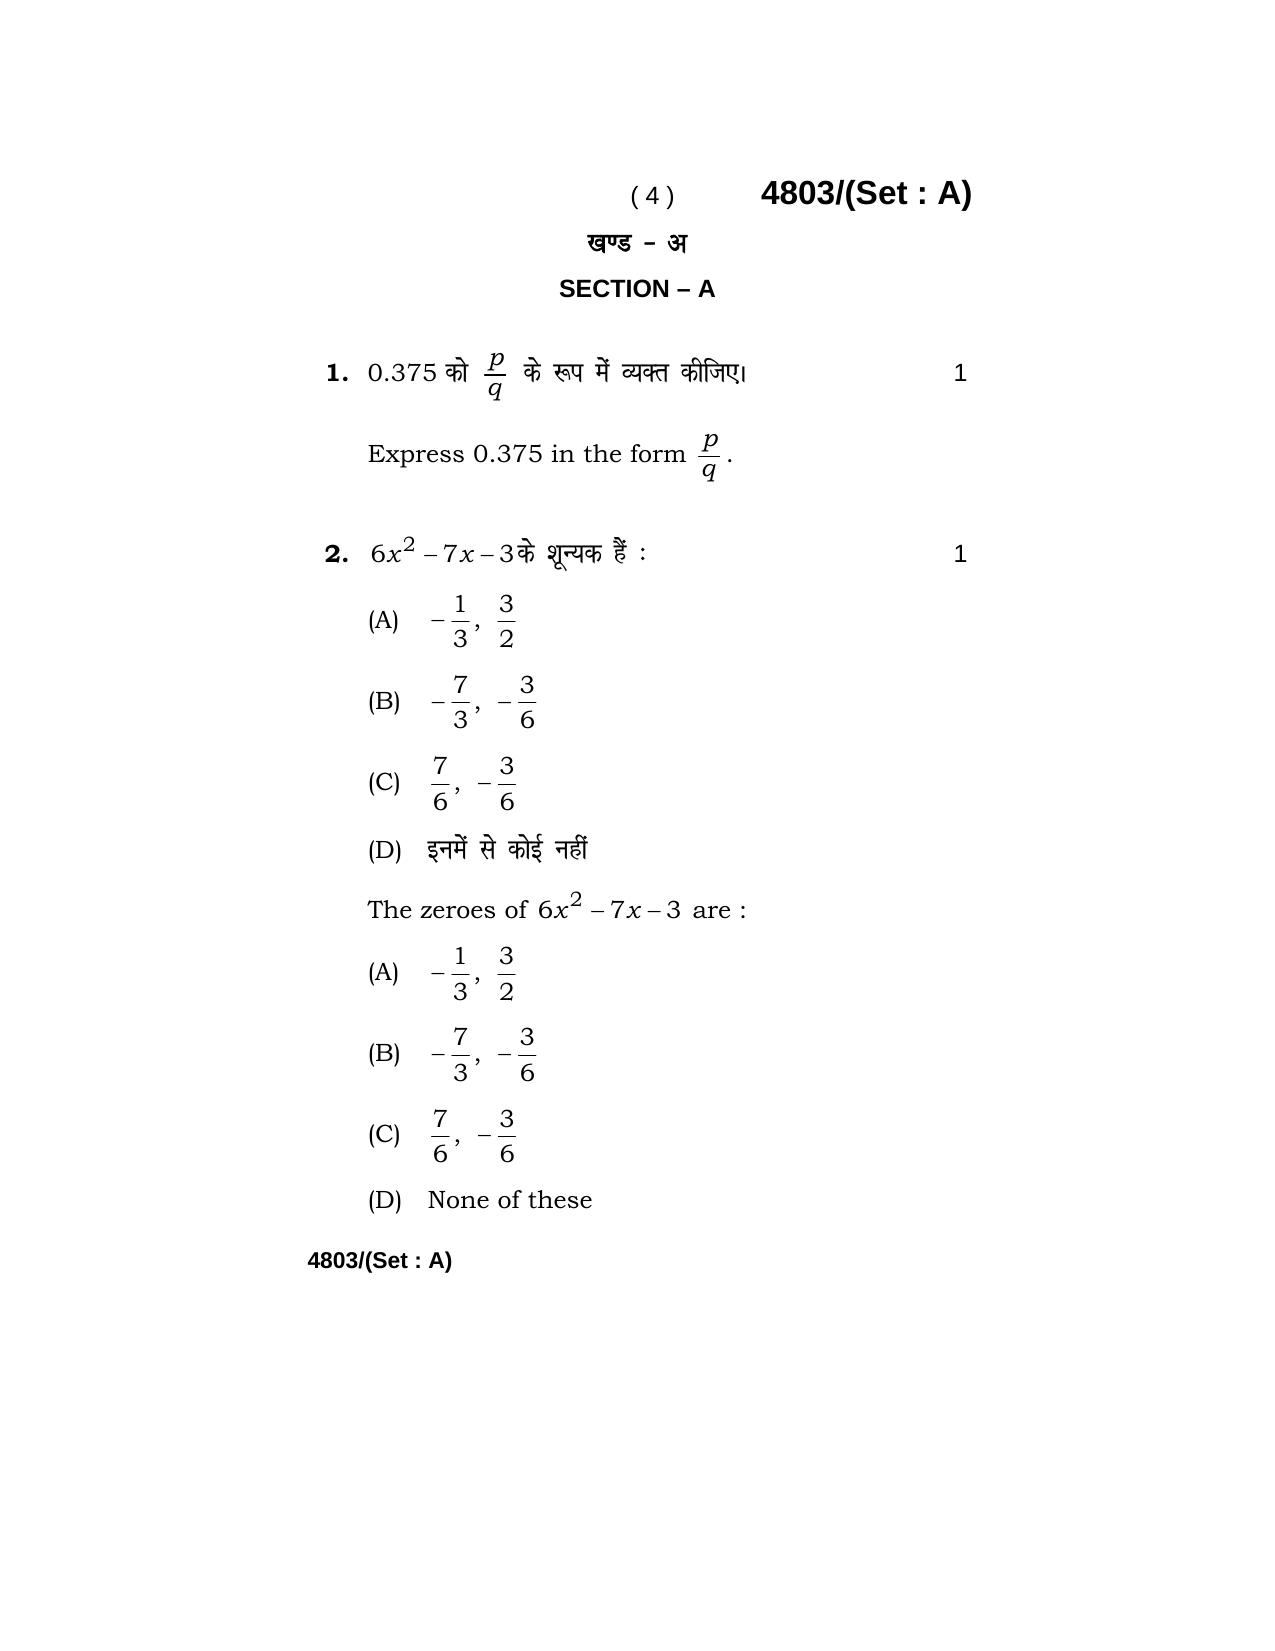 Haryana Board HBSE Class 10 Mathematics 2020 Question Paper - Page 4